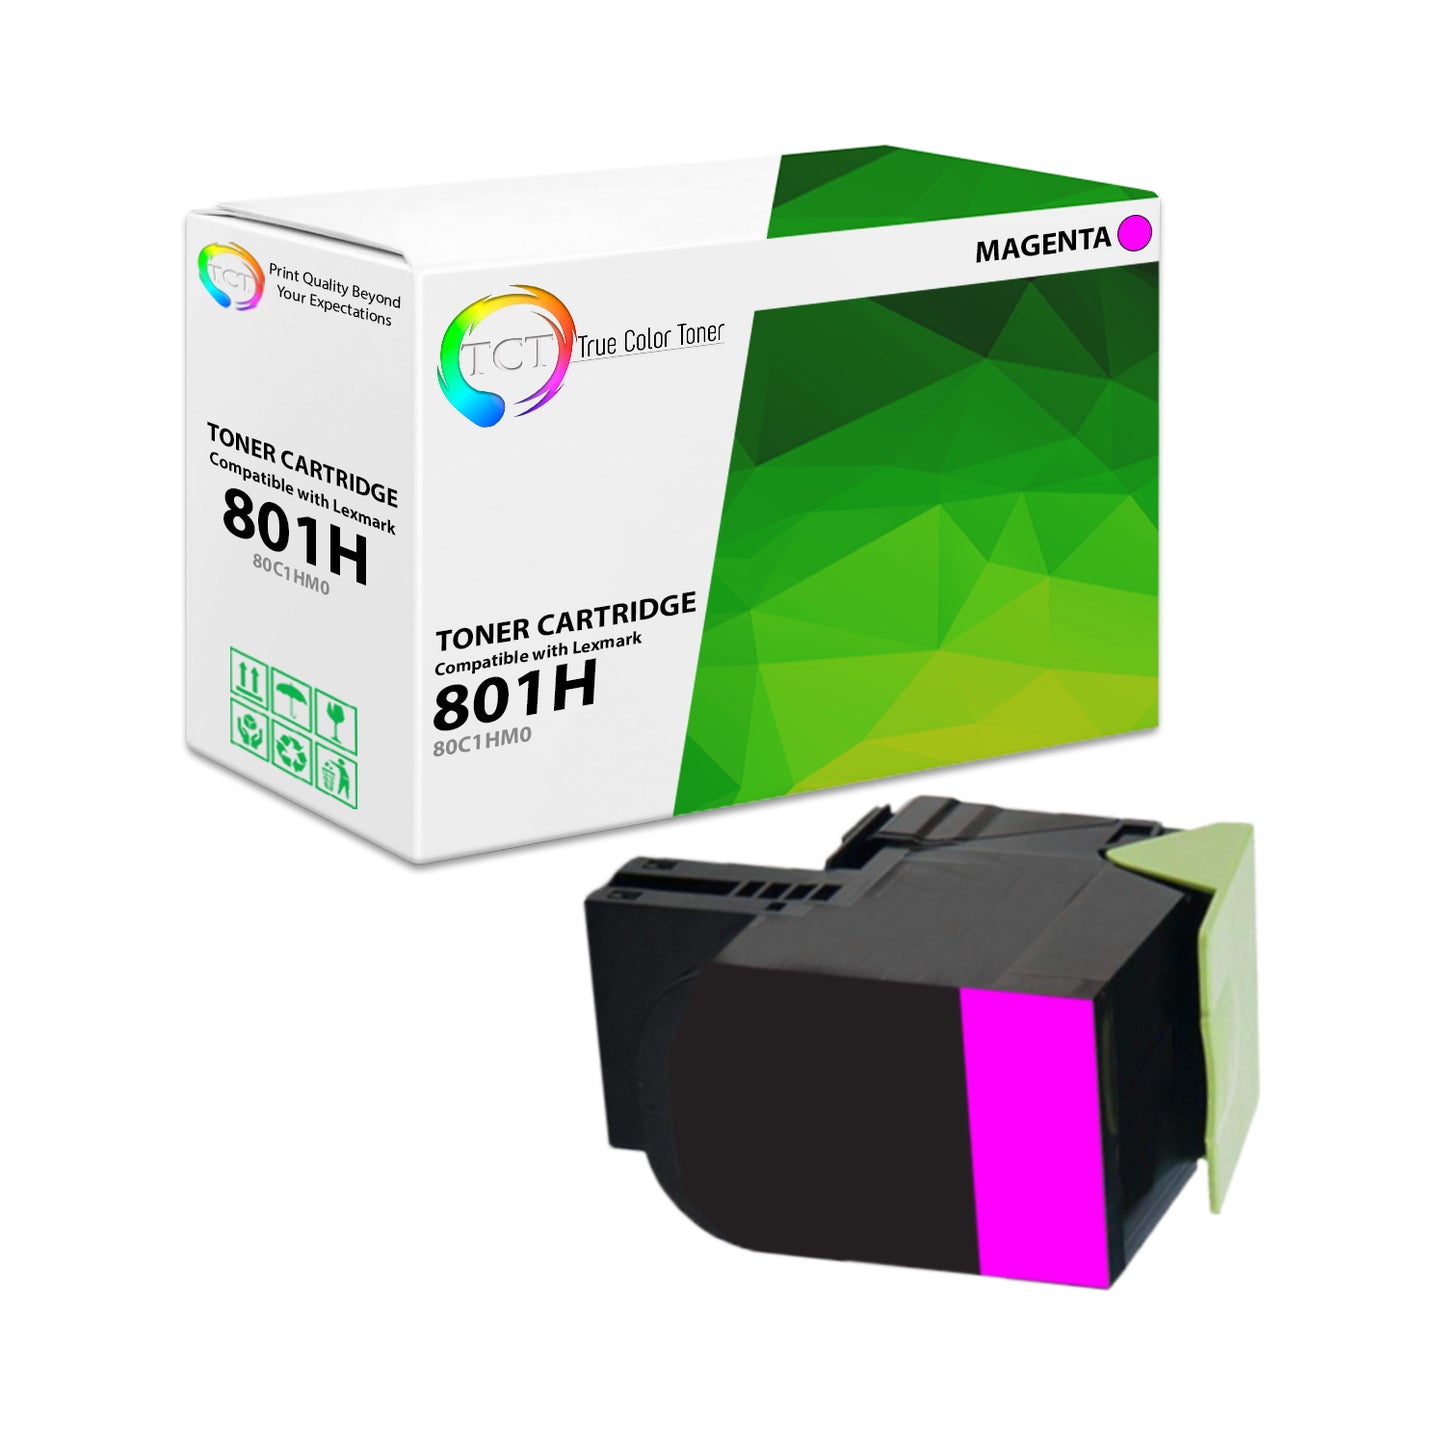 TCT Remanufactured HY Toner Cartridge Replacement for the Lexmark 801H Series - 1 Pack Magenta